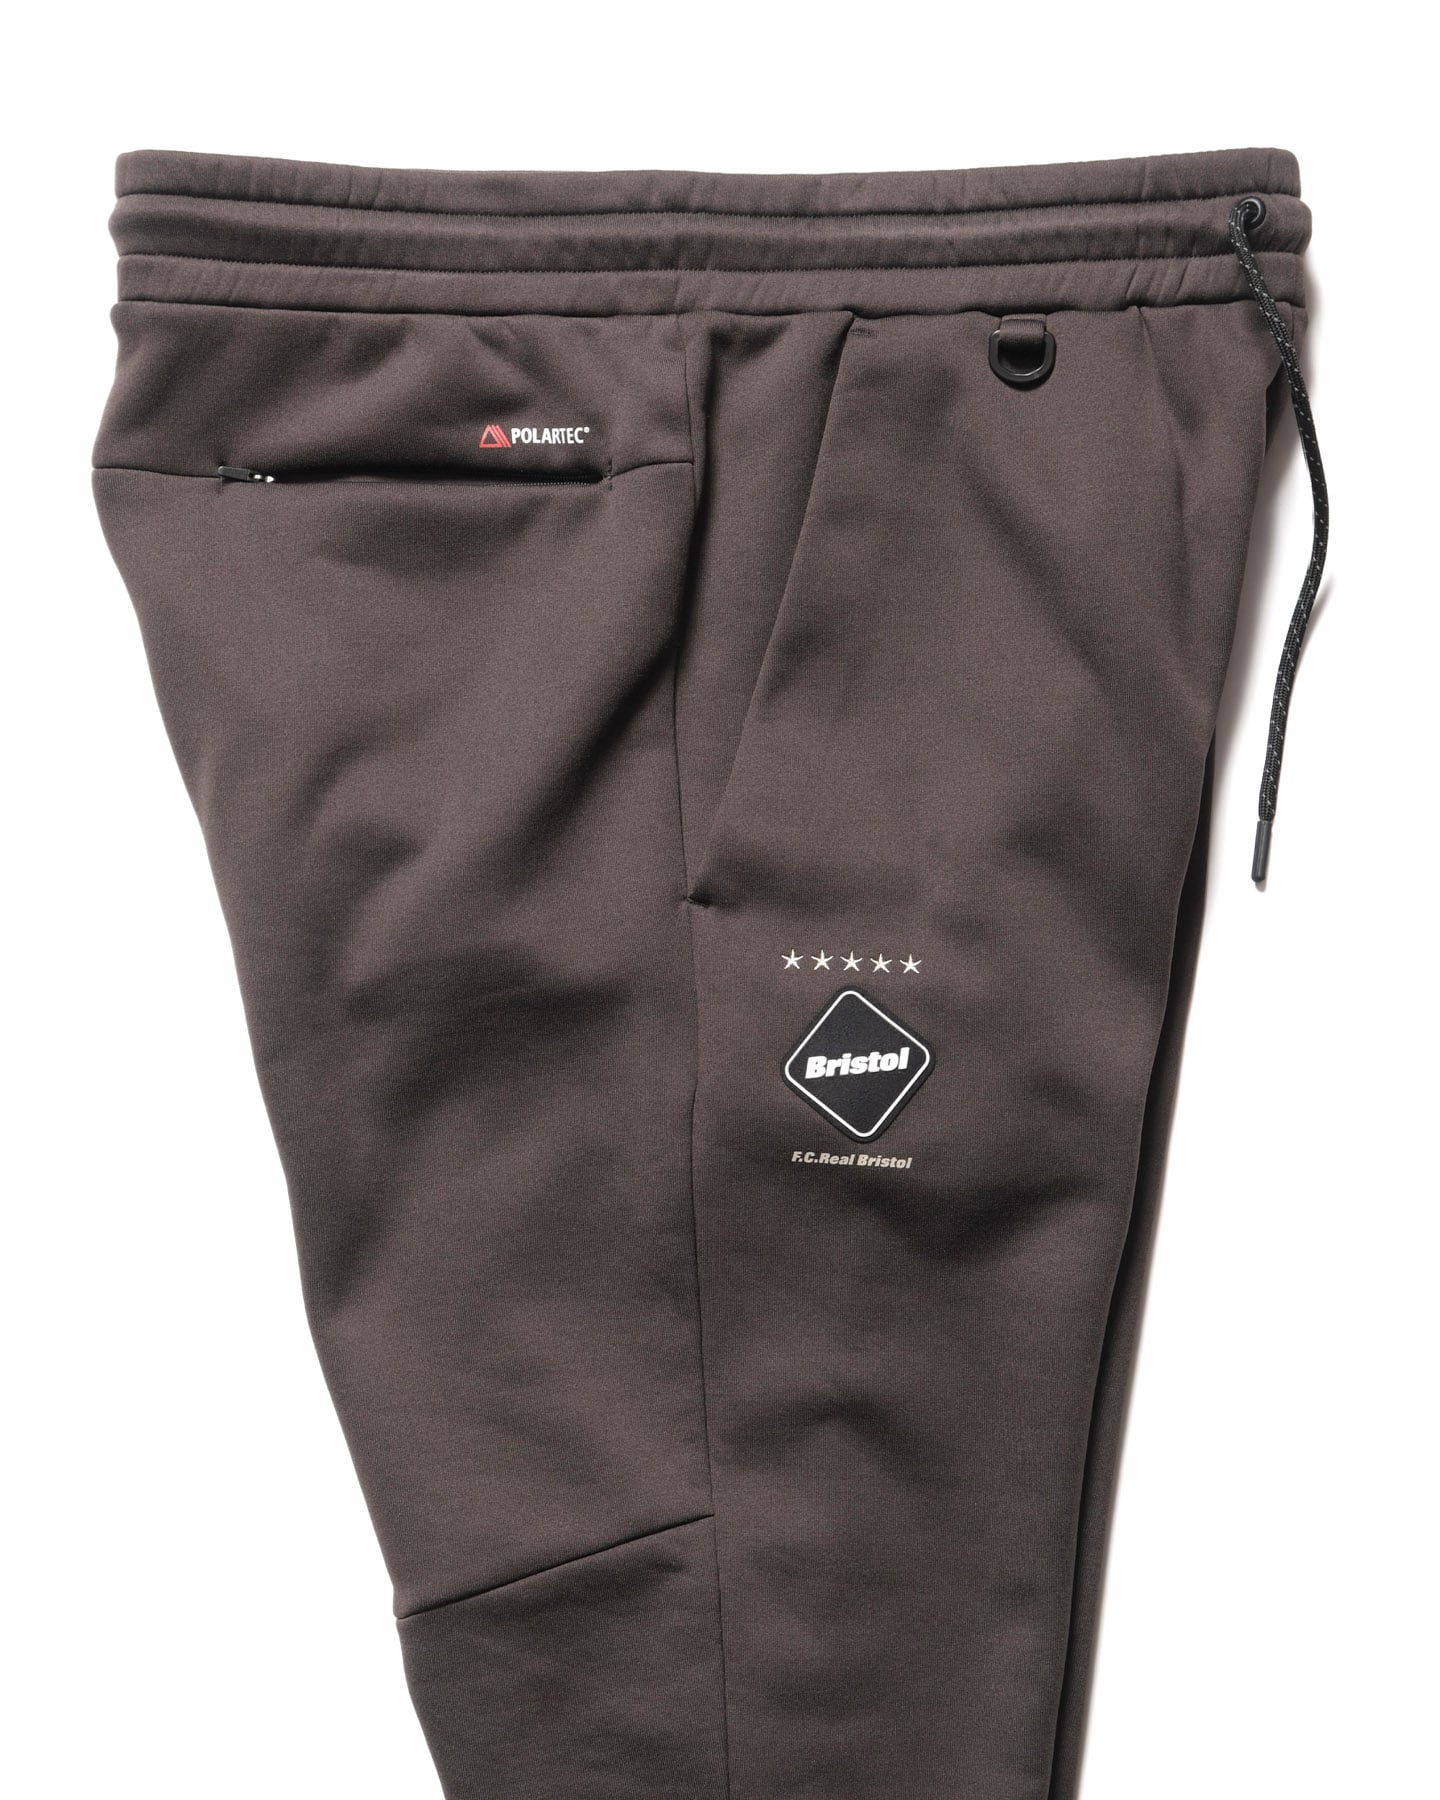 SOPH. | POLARTEC POWER STRETCH TRAINING RIBBED PANTS(S BROWN):